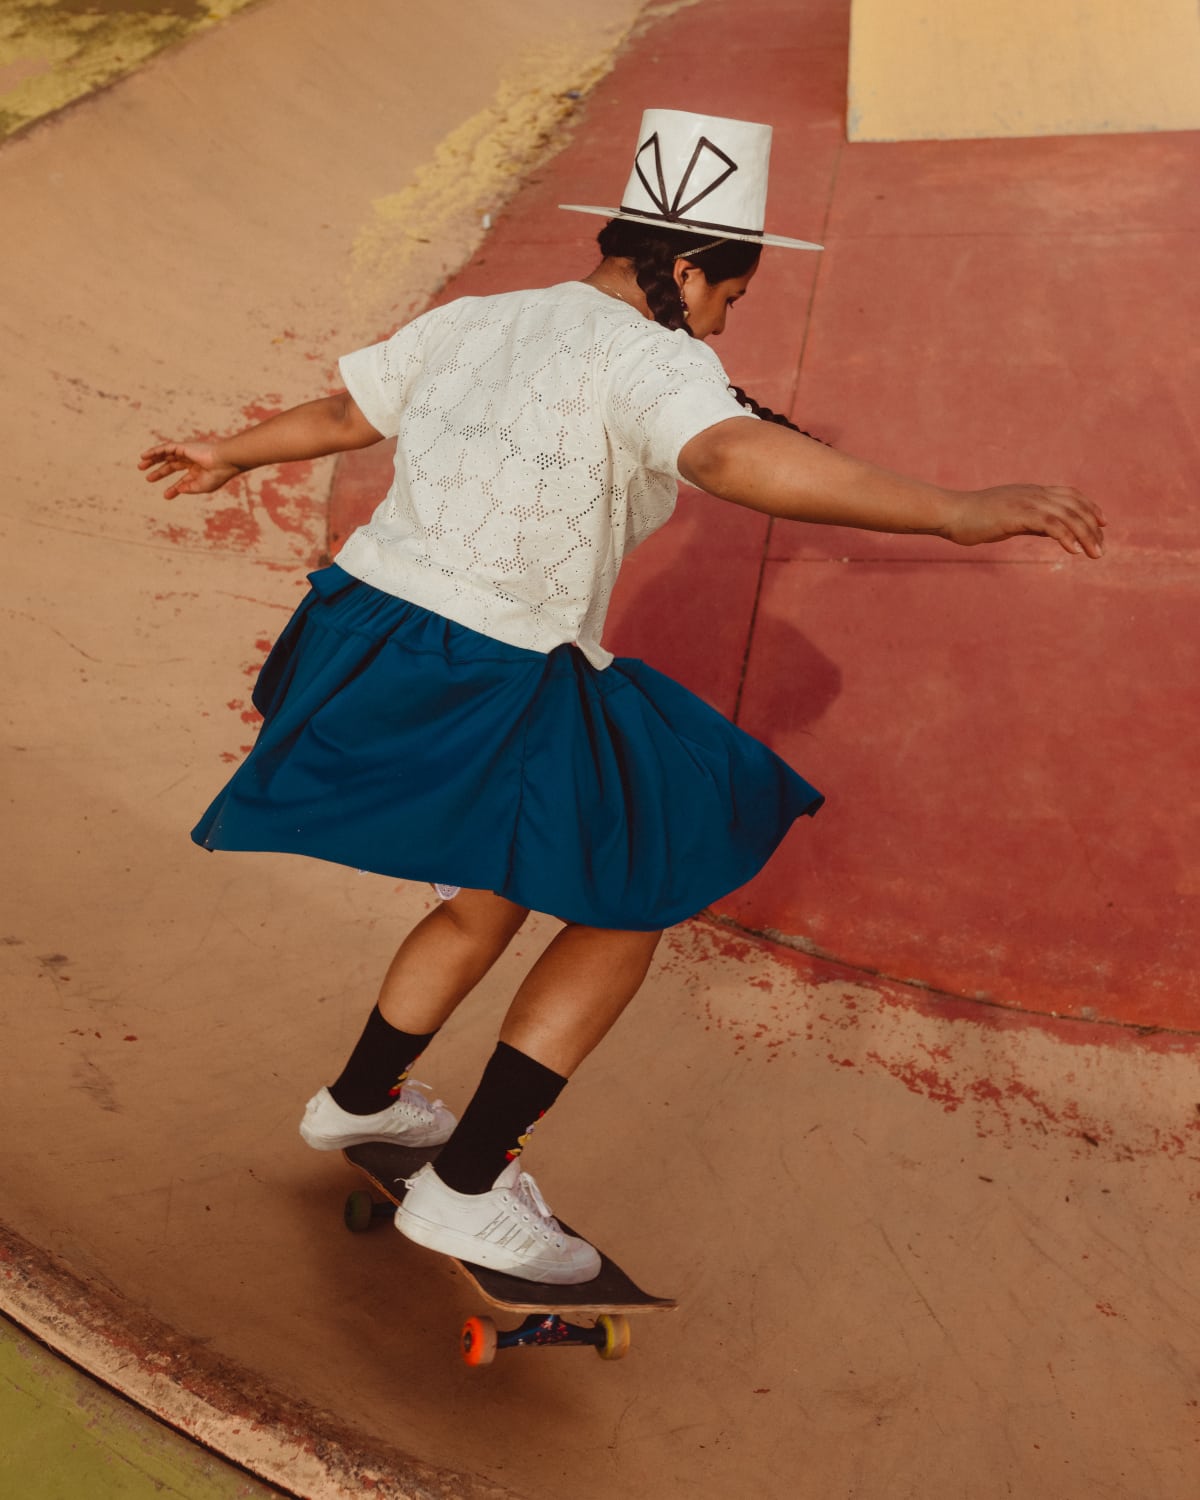 Cholitas Skaters from Bolivia Fly on Their Skateboards in This Series of Empowering Portraits